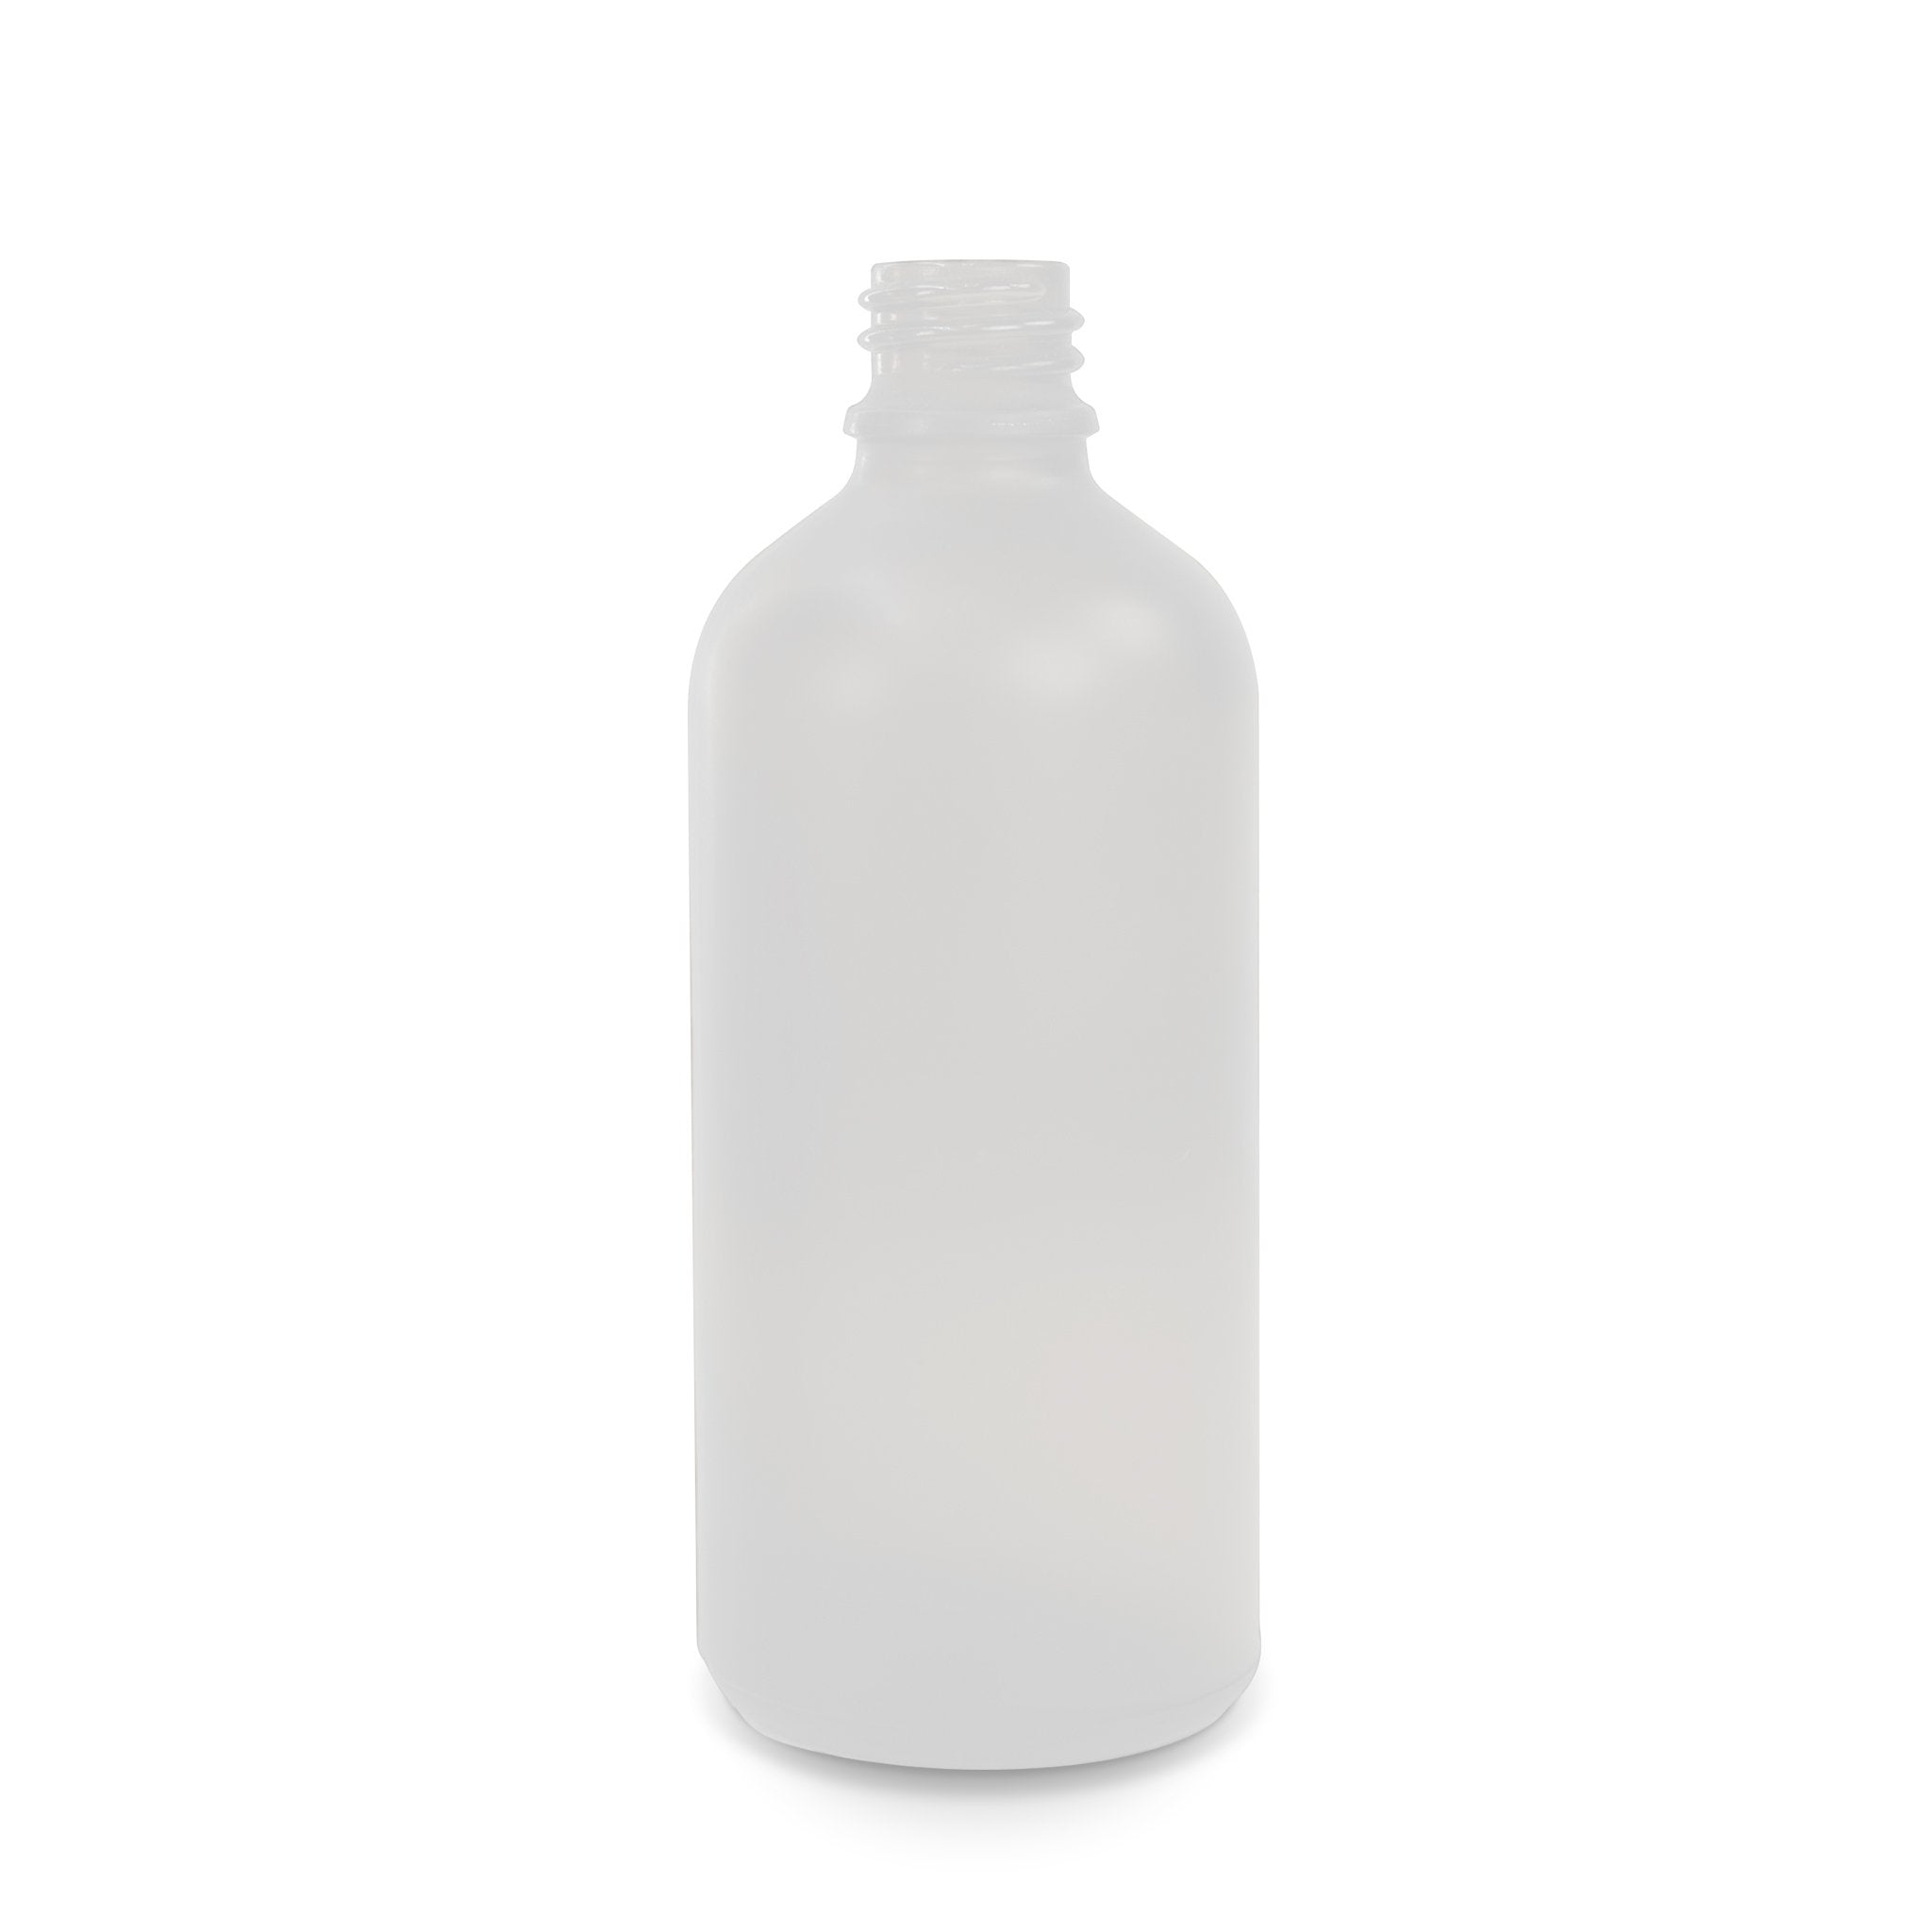 Stone Candles Supplies Bottle Room Spray and Diffuser White